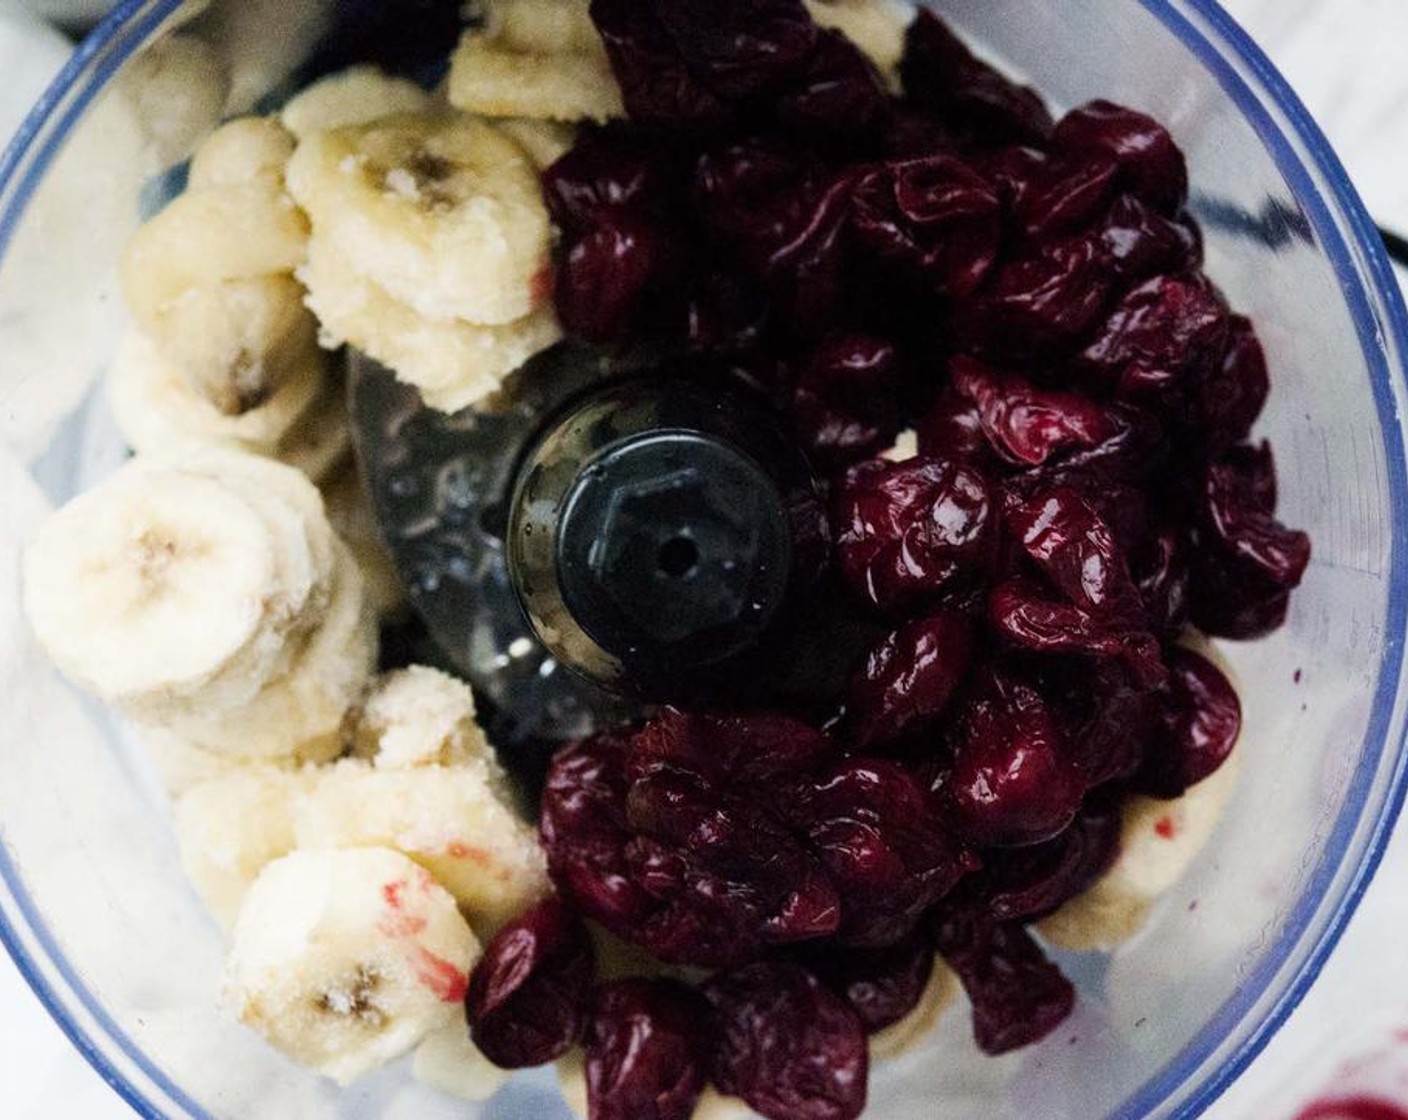 step 1 Place Bananas (3) and Frozen Cherries (2 cups) in a food processor and blend until creamy.